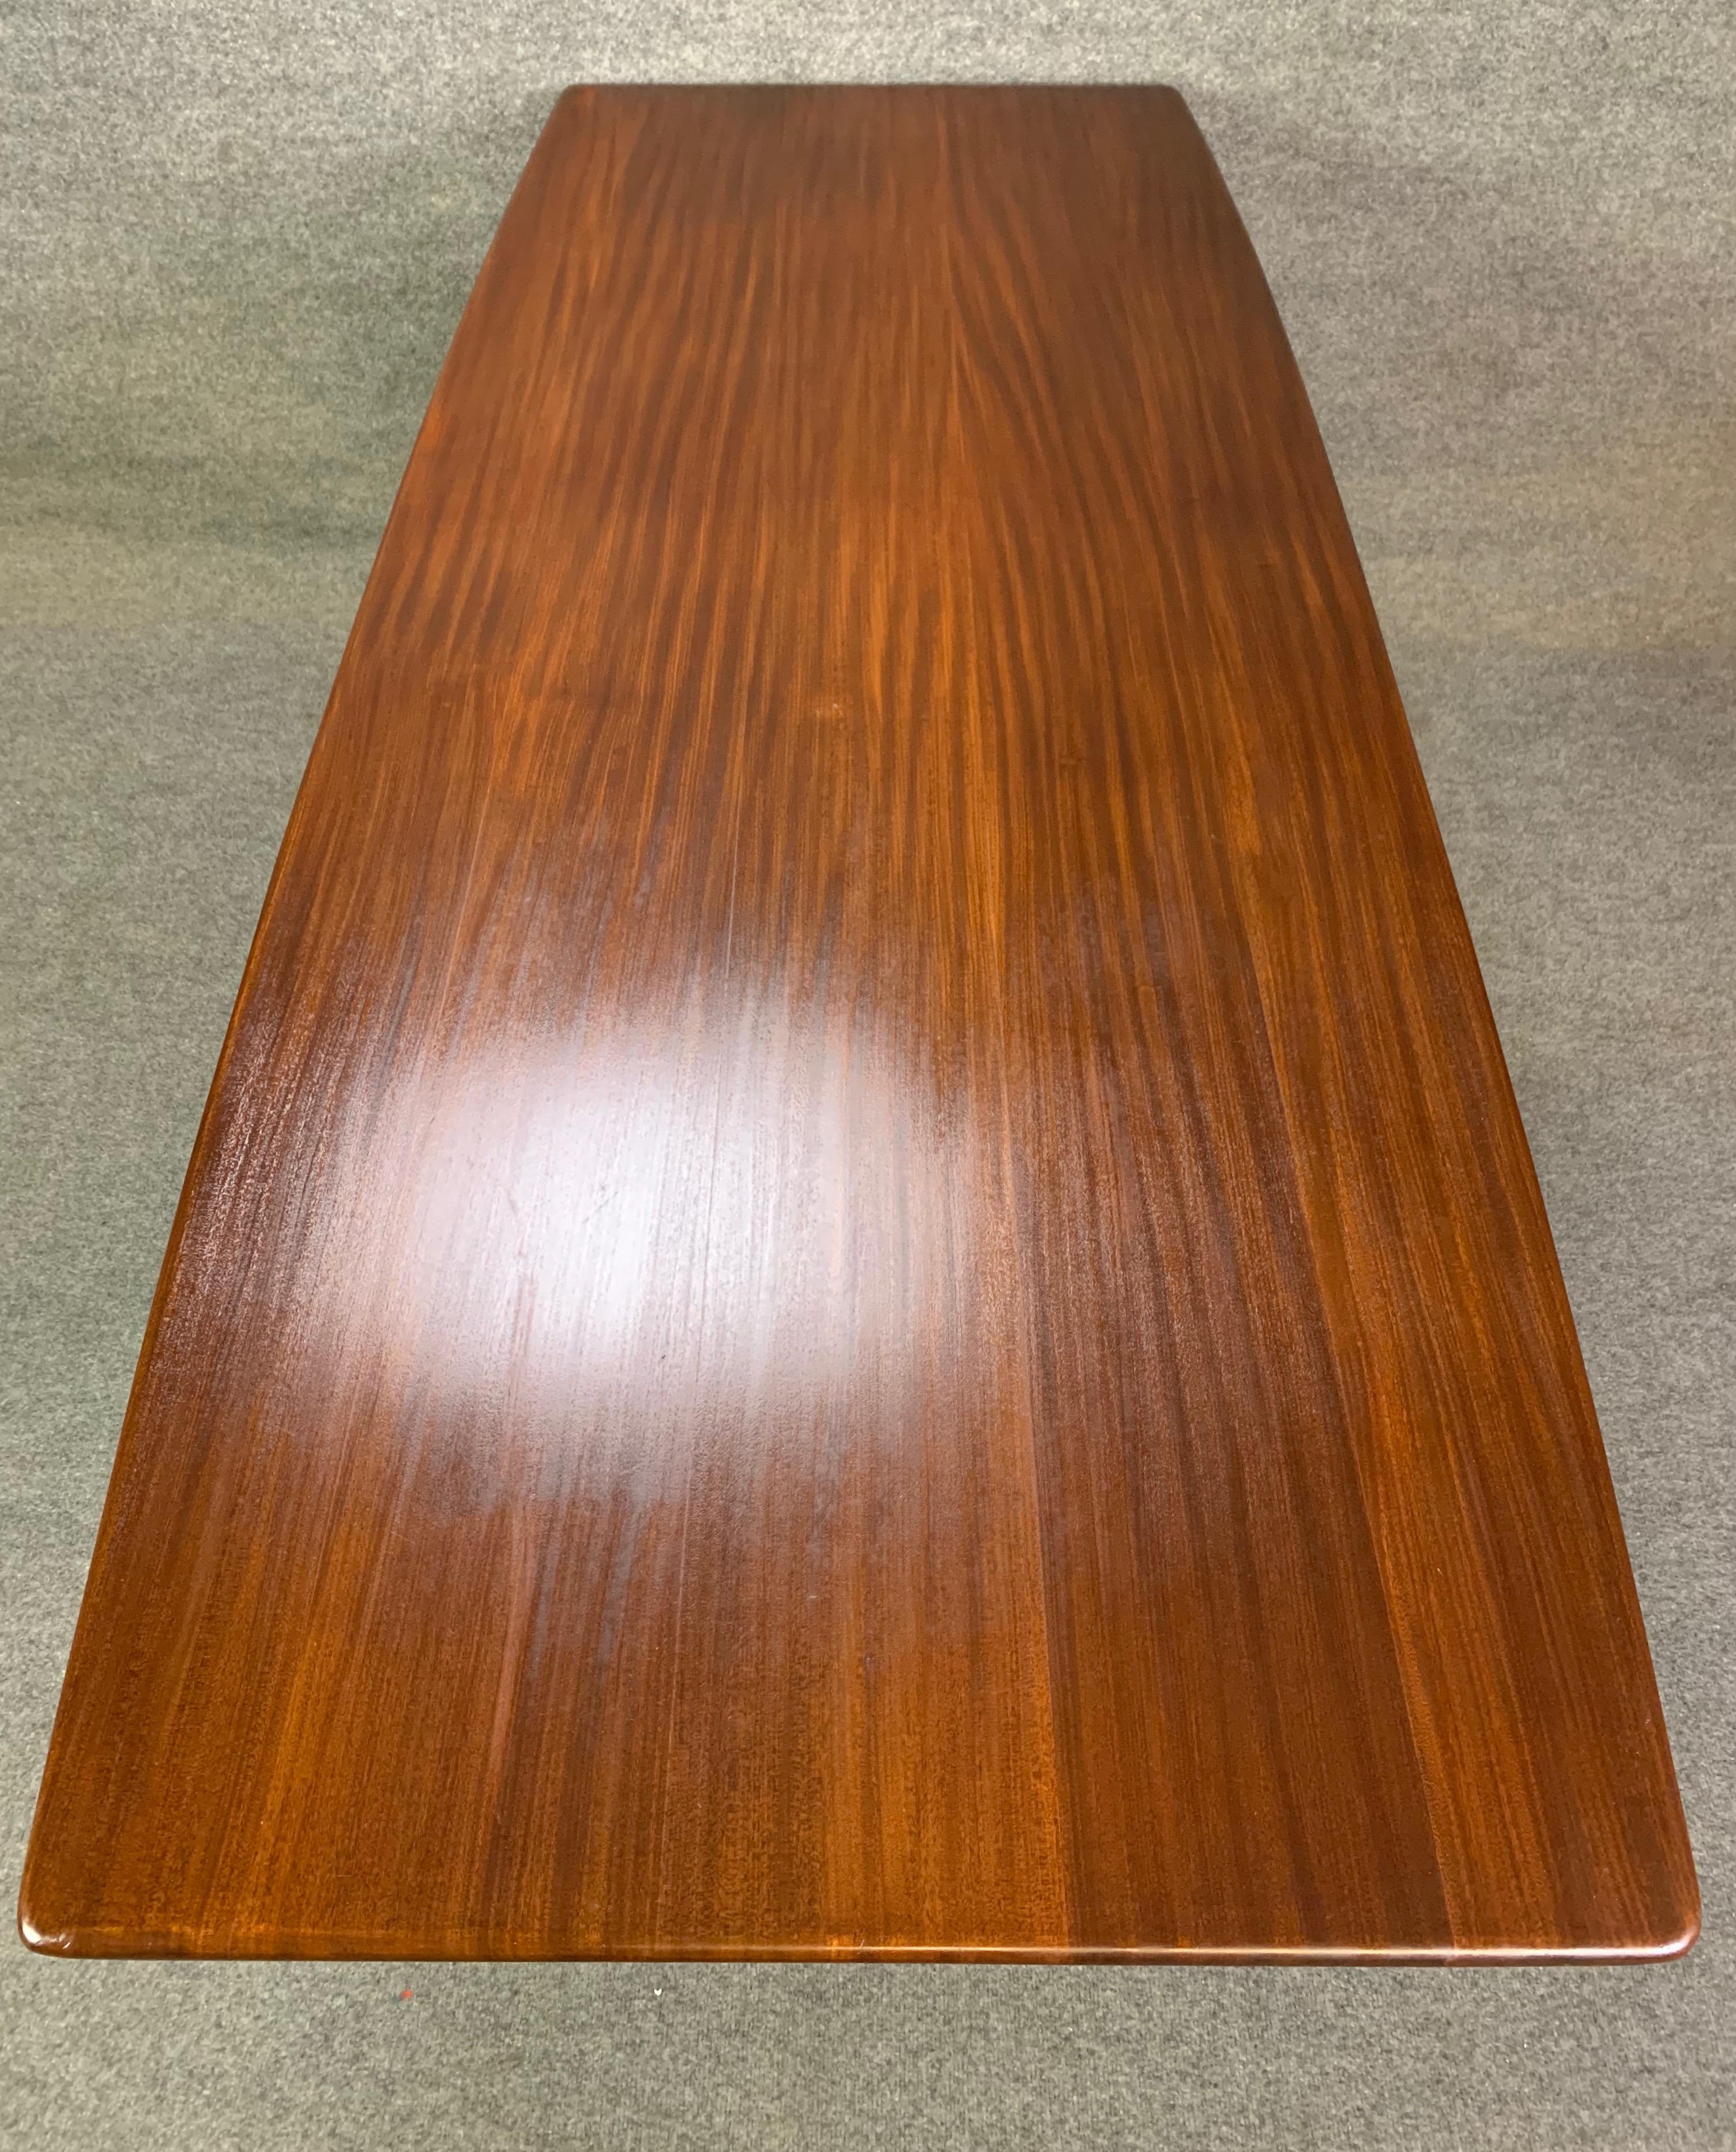 Mid-20th Century Vintage Midcentury Teak Dining Table Attributed to Richard Hornby & Fyne Ladye For Sale